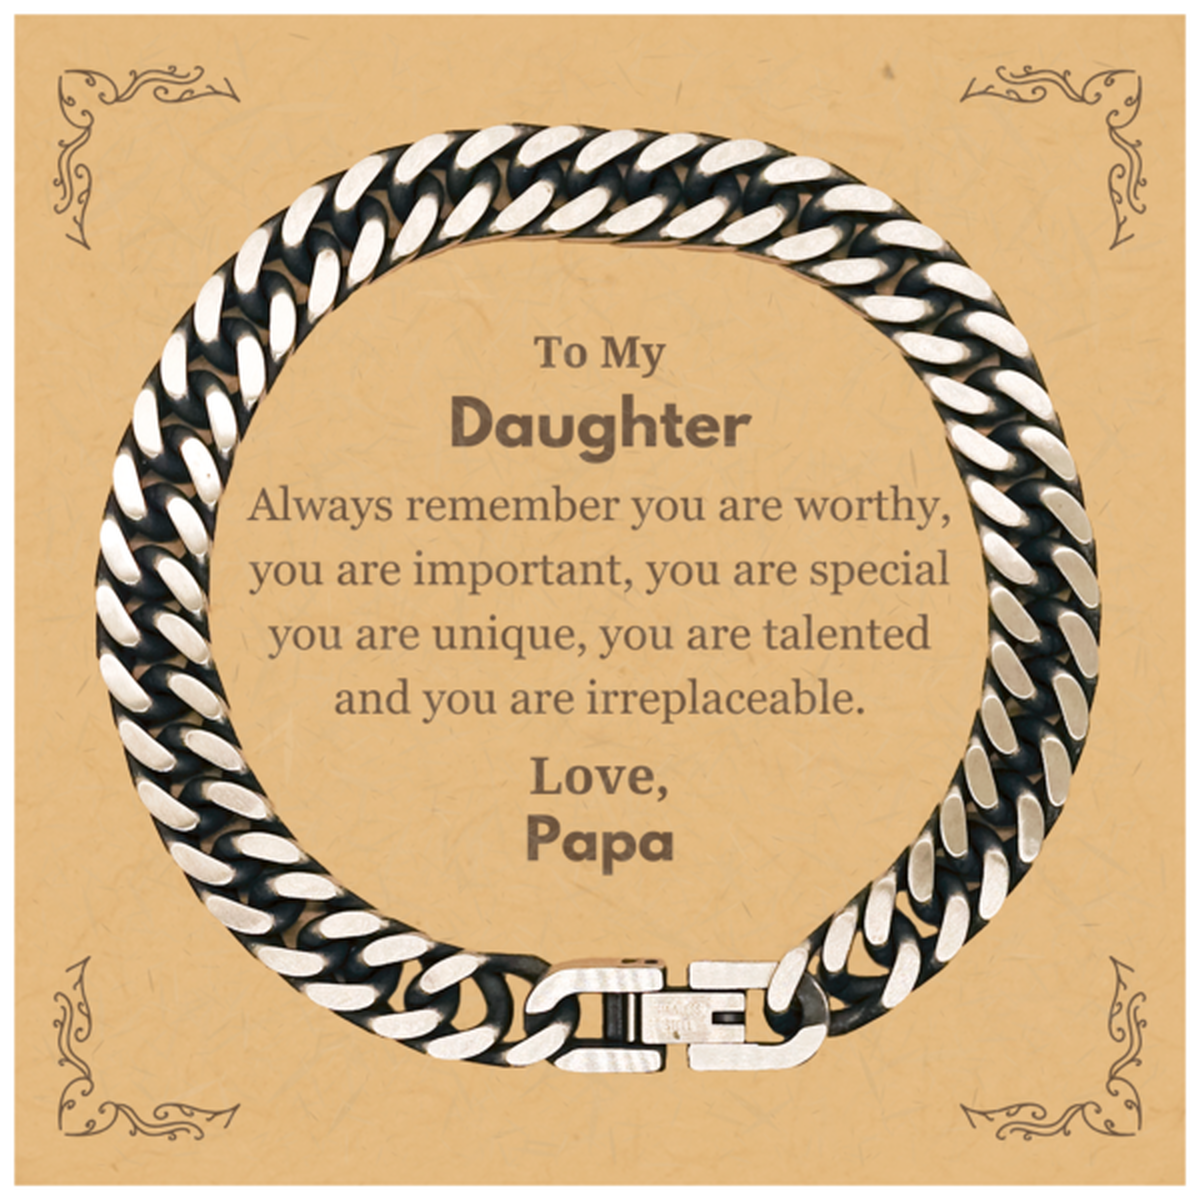 Daughter Birthday Gifts from Papa, Inspirational Cuban Link Chain Bracelet for Daughter Christmas Graduation Gifts for Daughter Always remember you are worthy, you are important. Love, Papa